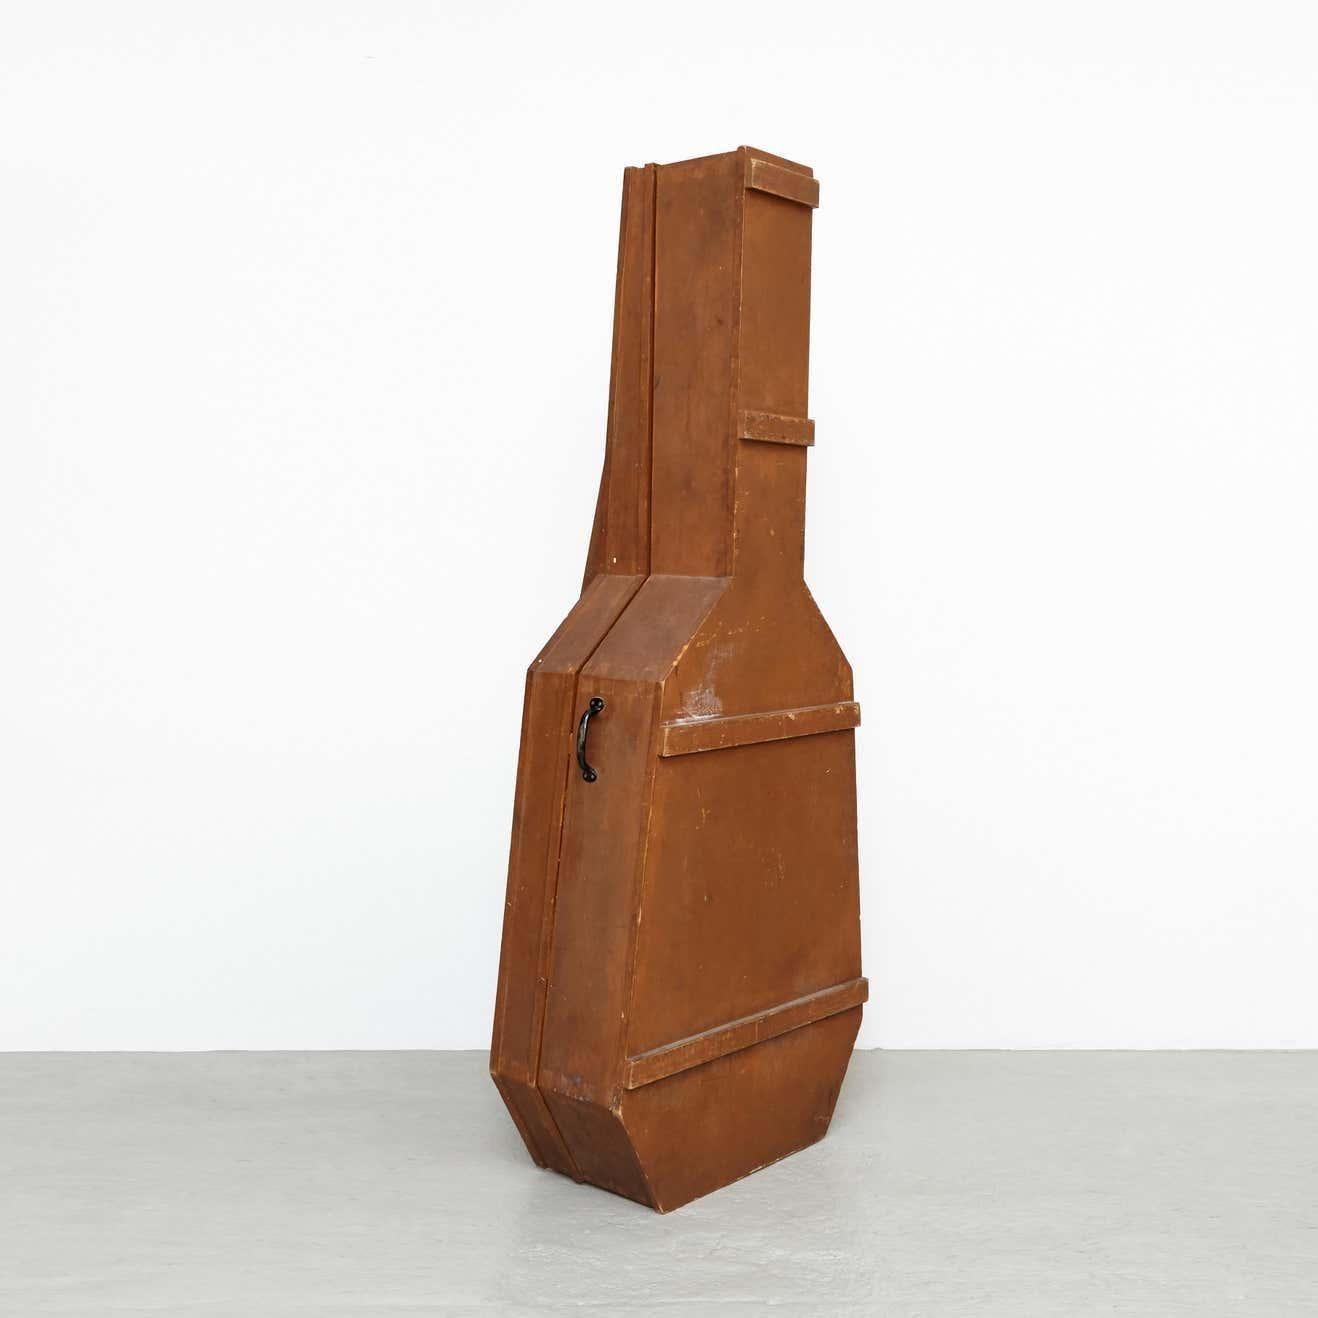 Sandro's Inri: a Contemporary Minimalist Sculpture and Objét Trouvé, 2017 In Good Condition For Sale In Barcelona, Barcelona